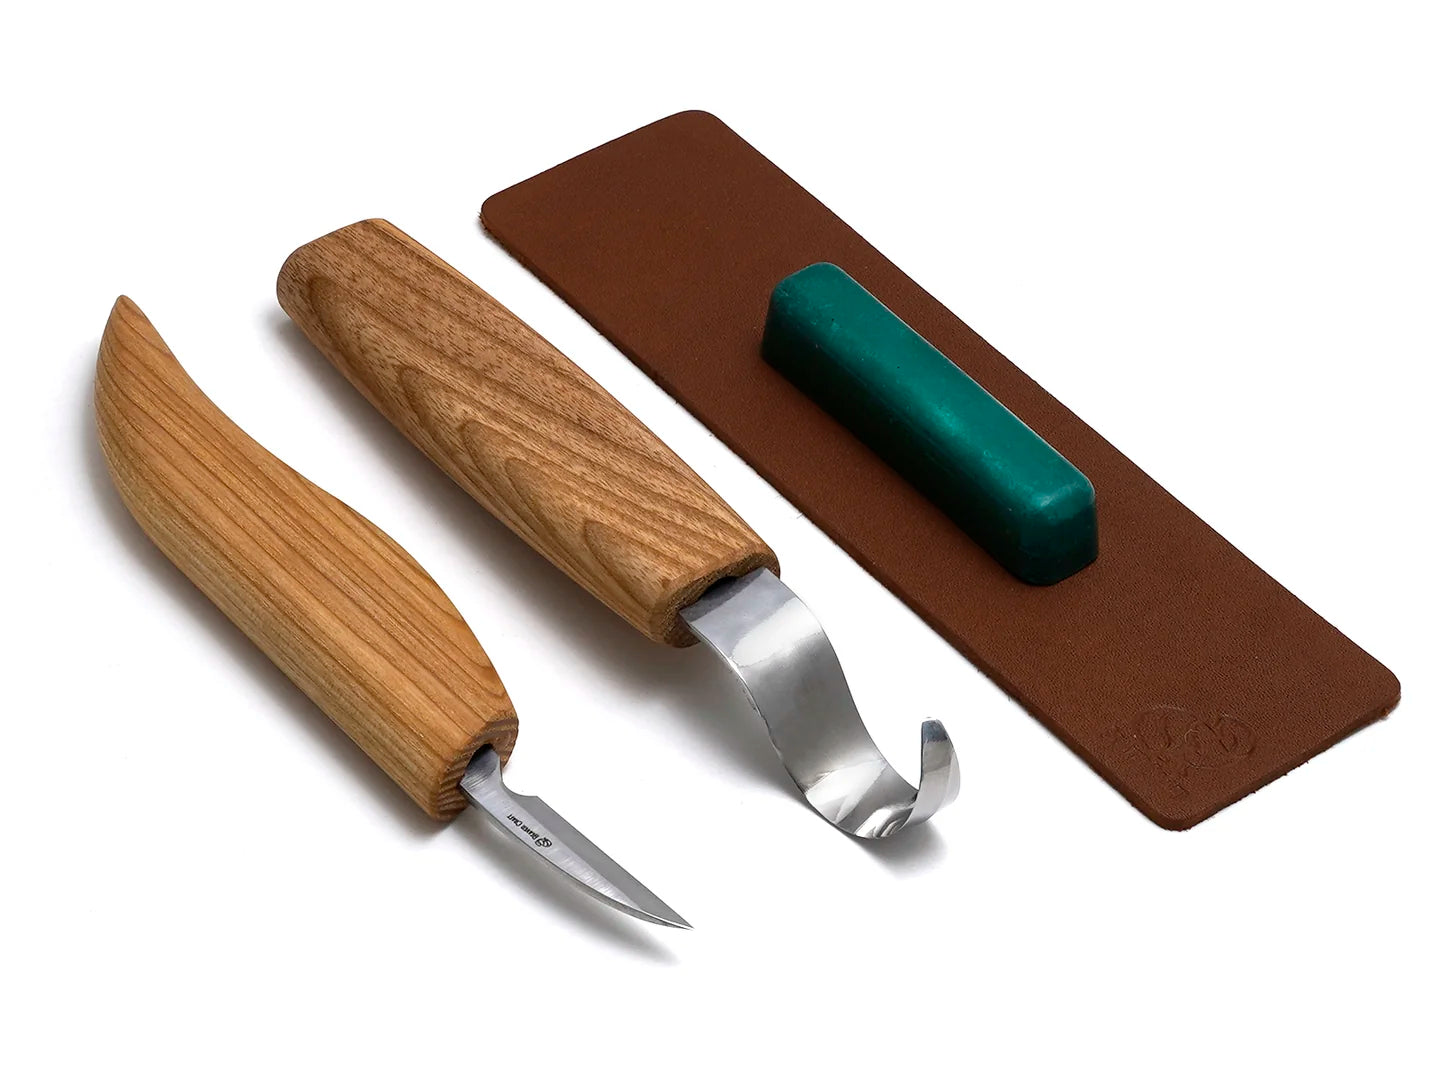 Spoon Carving Kit Overview - BeaverCraft Spoon Carving Tools  Wood spoon  carving, Spoon carving tools, Wood carving for beginners